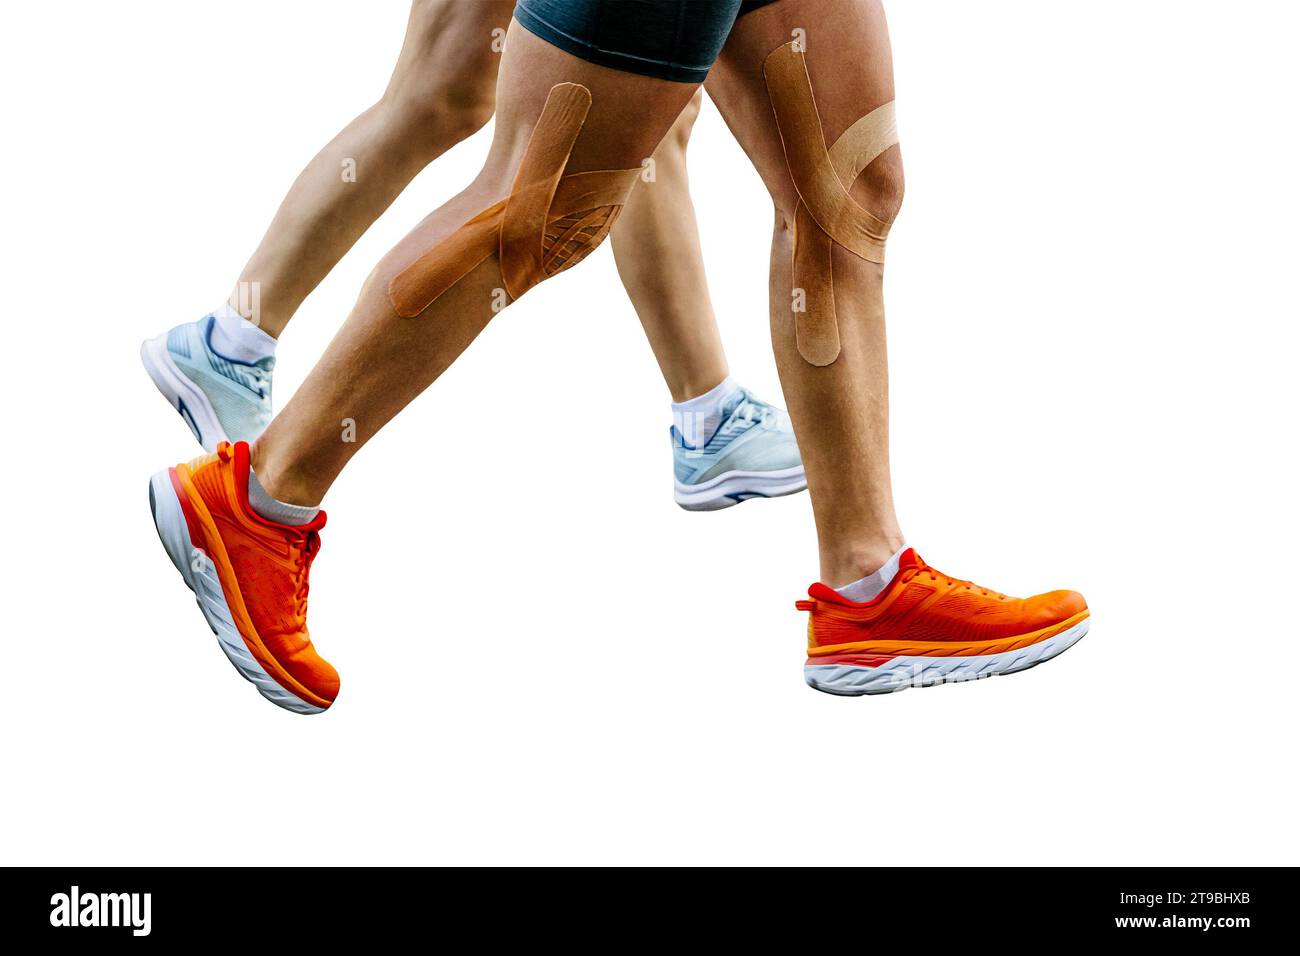 close-up legs couple runners man and woman running marathon race together isolated on white background Stock Photo